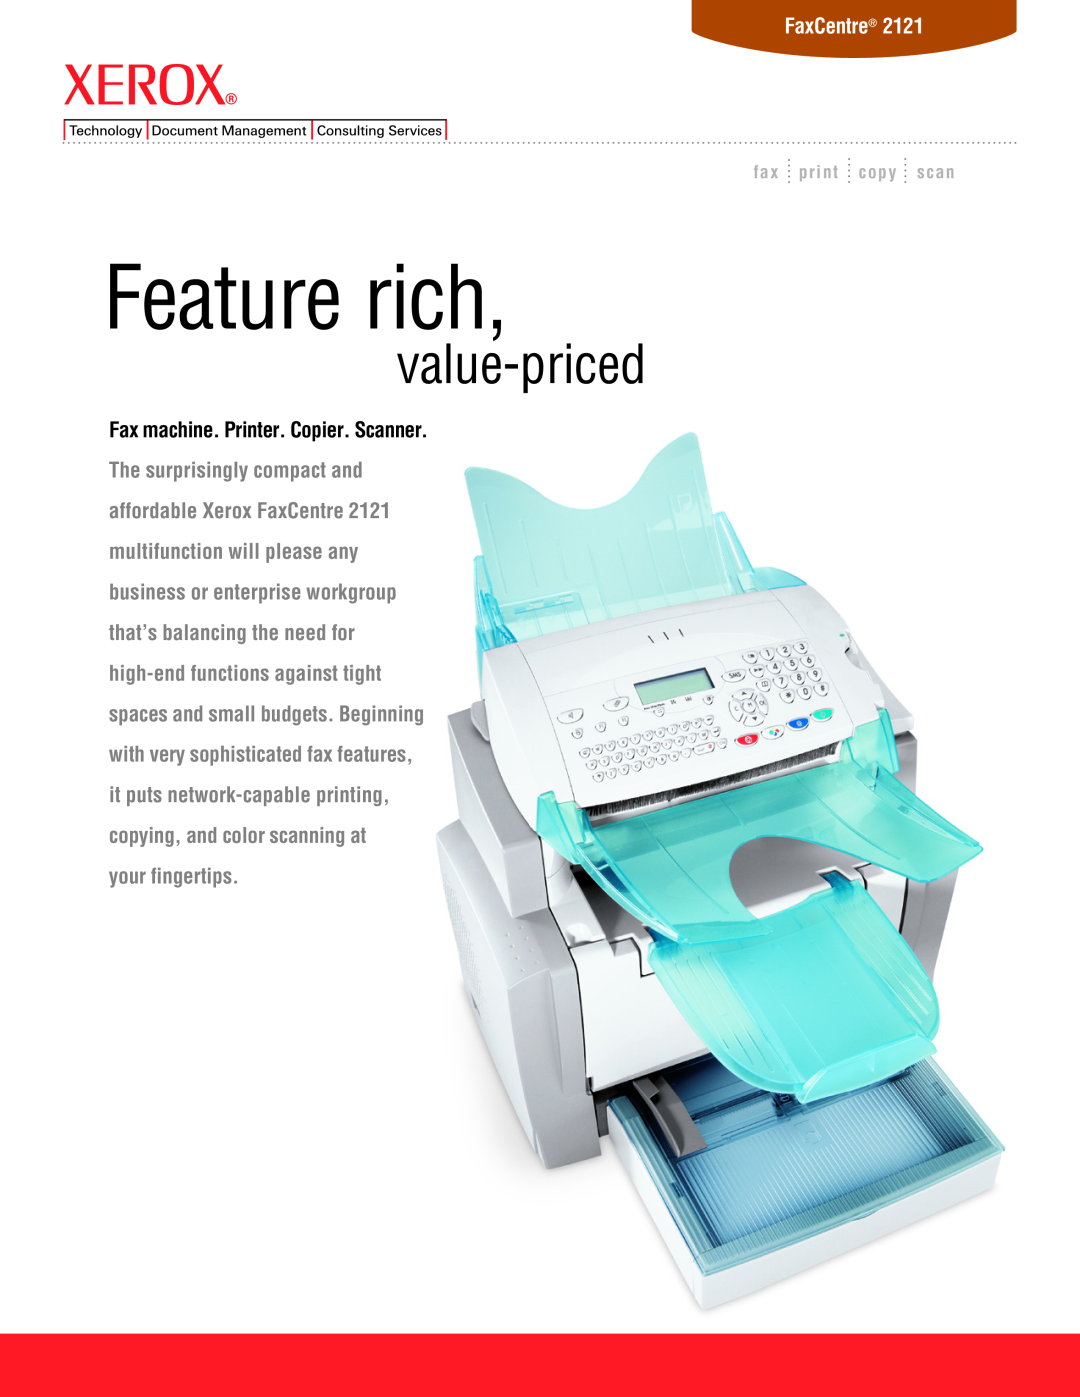 Xerox 2121 manual FaxCentre, Feature rich, value-priced, your fingertips, fax print copy scan 